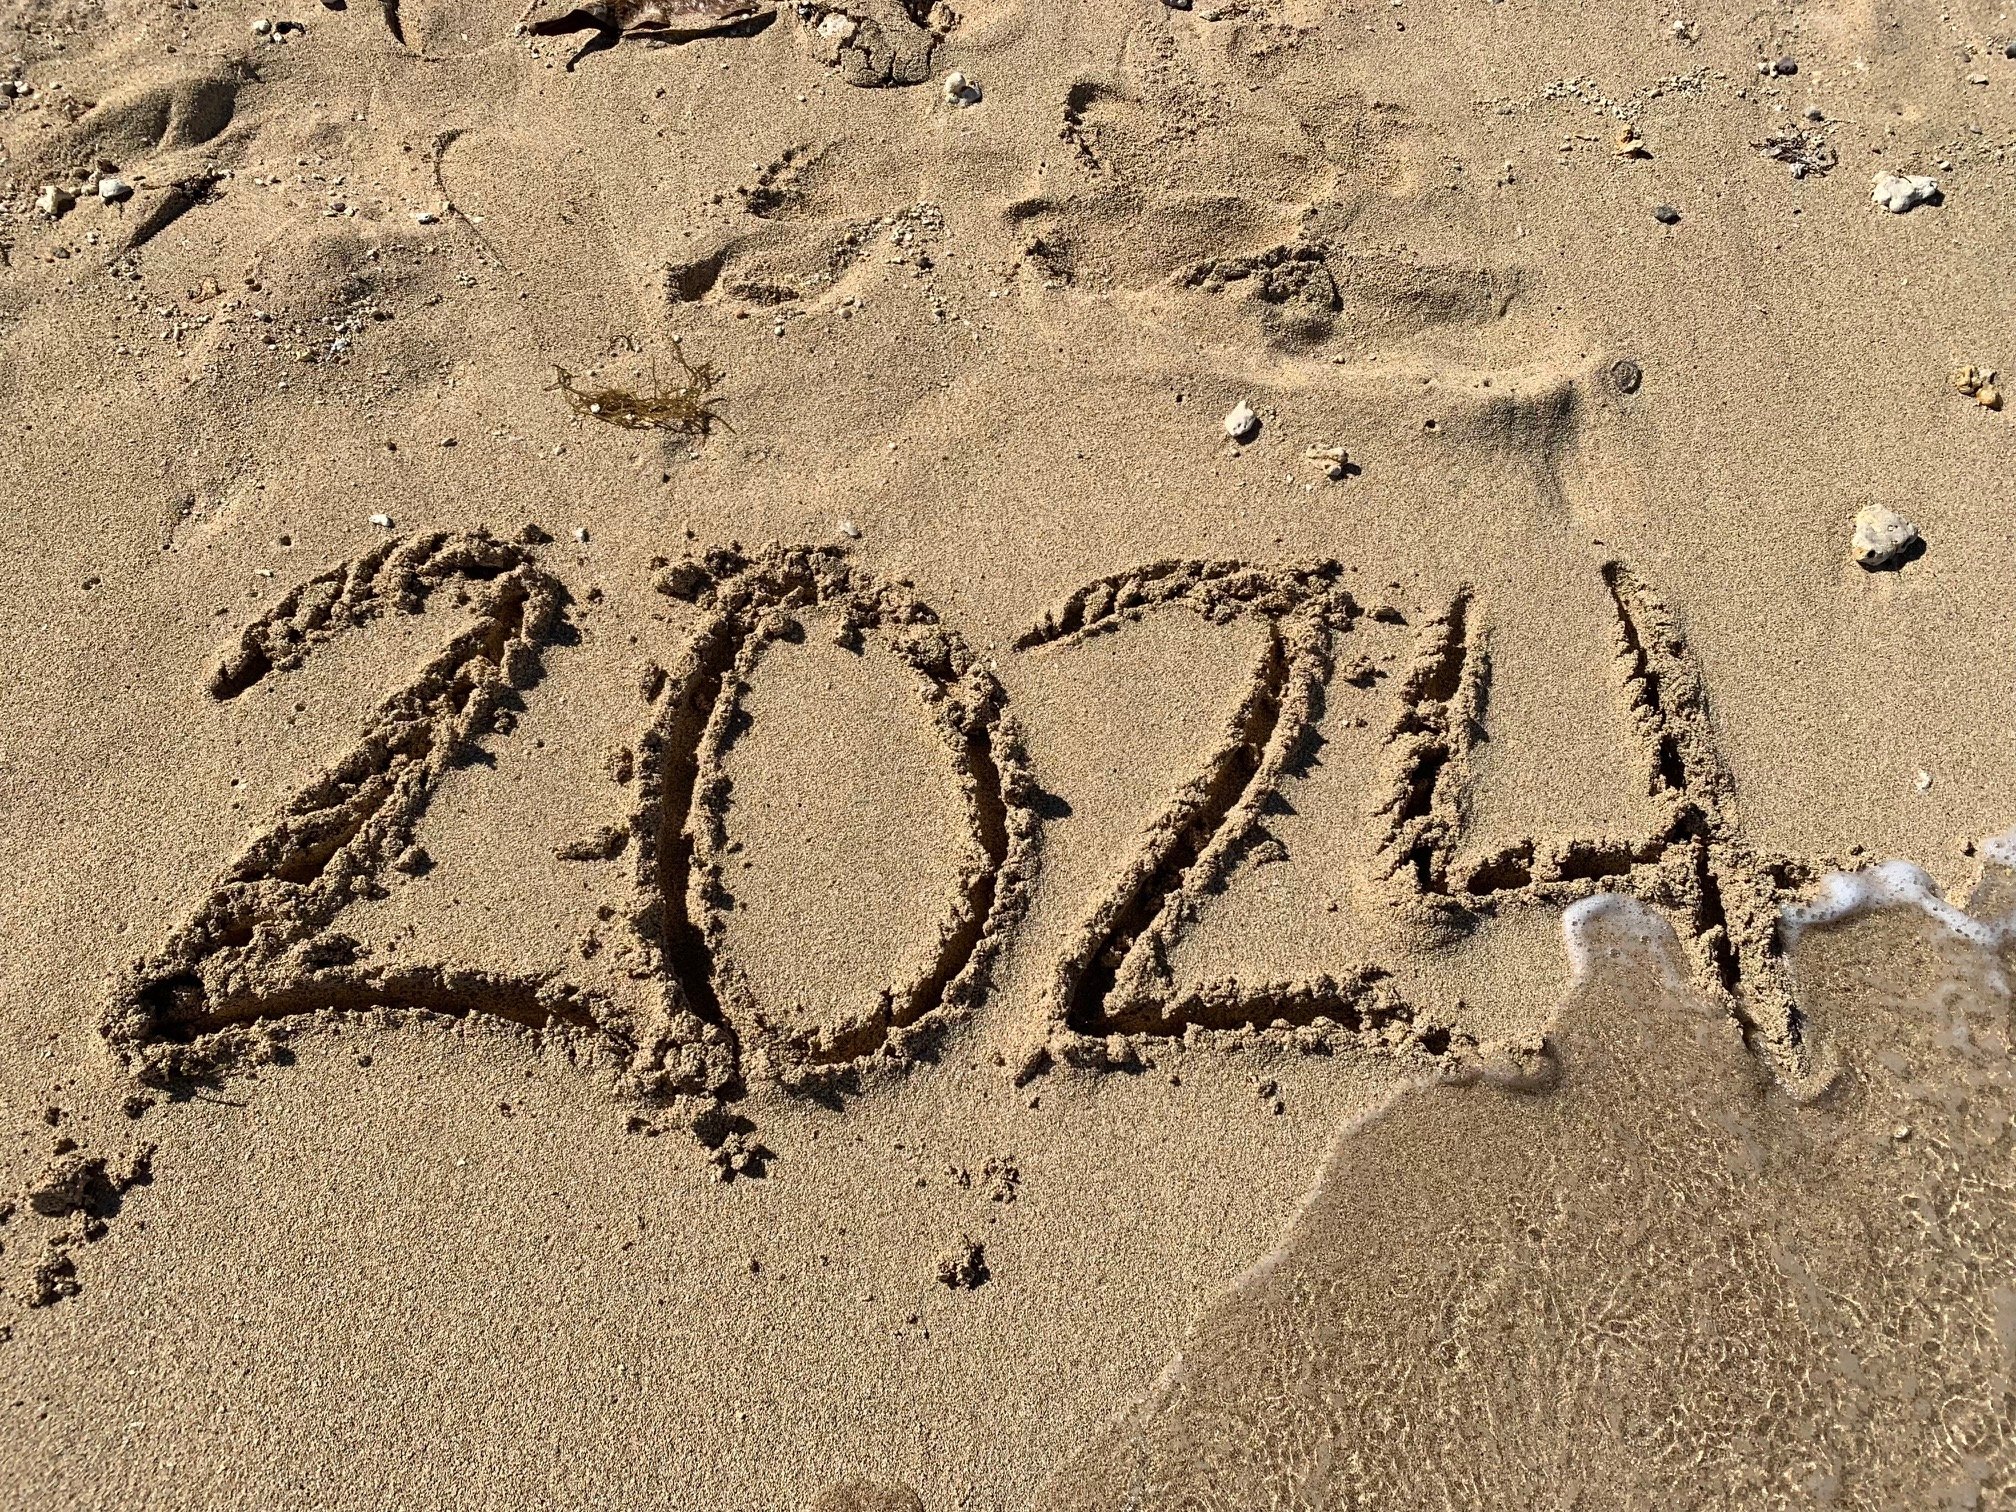 2024 drawn in the sand